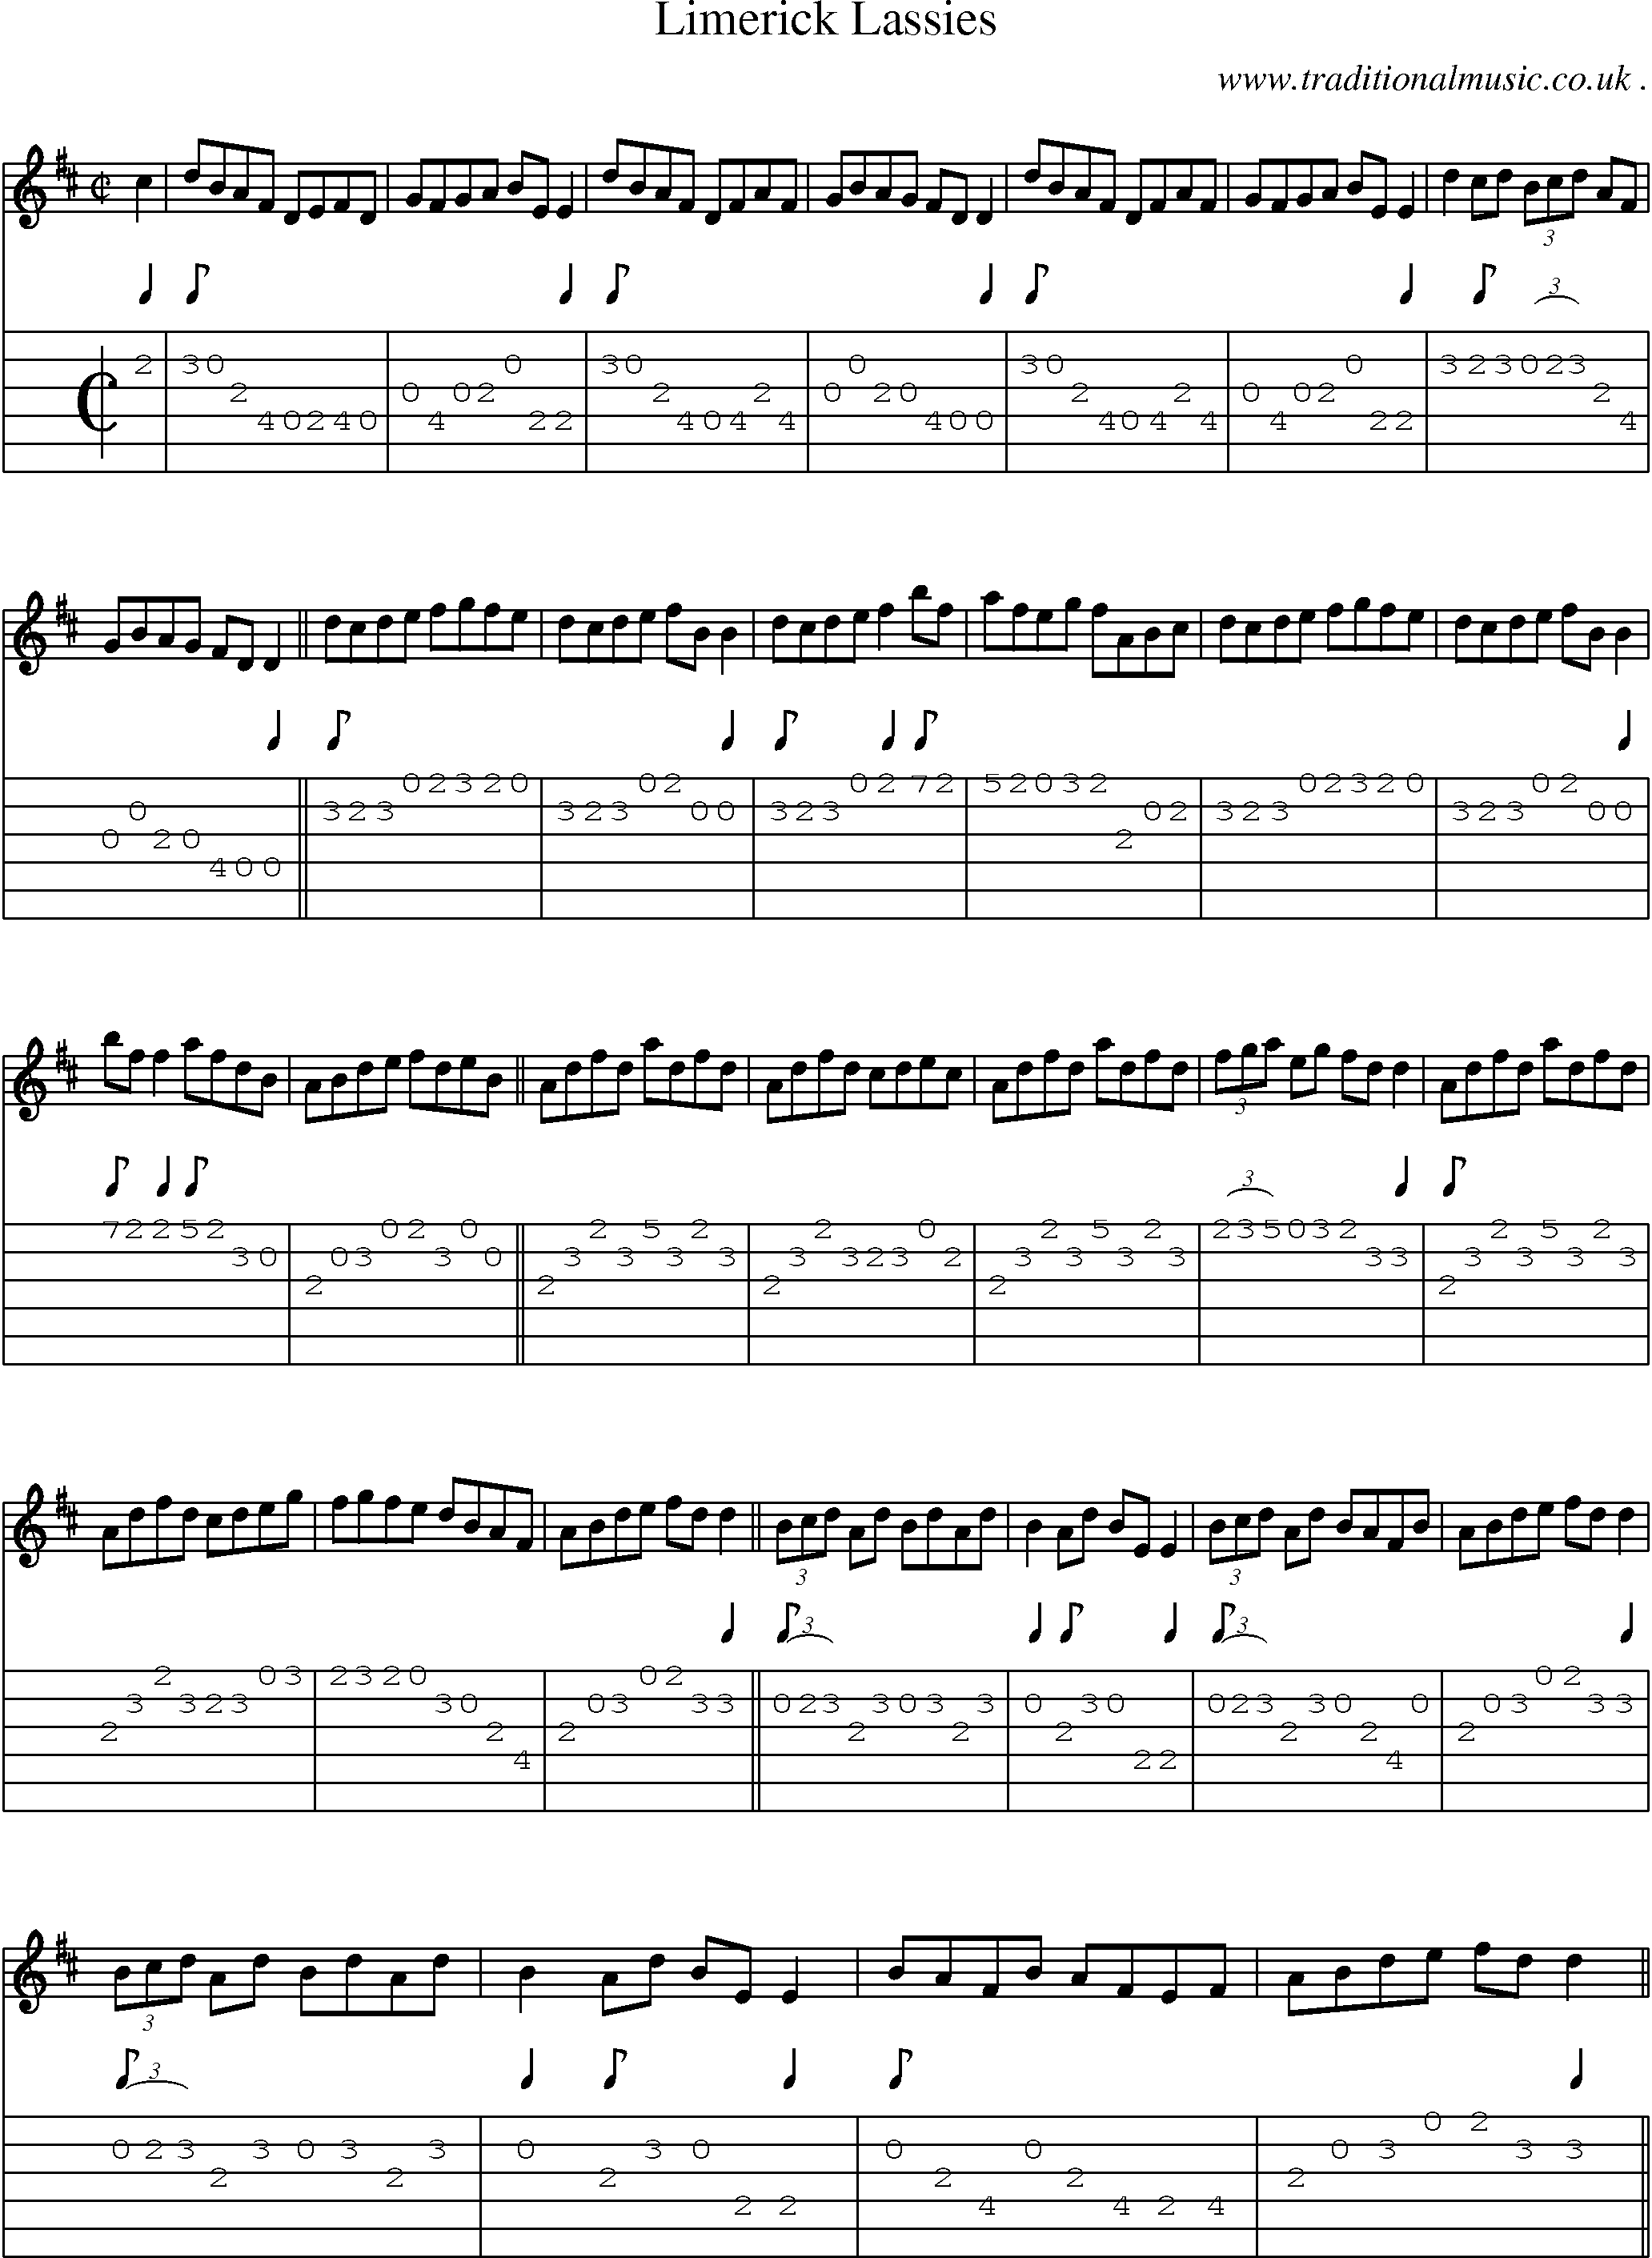 Sheet-Music and Guitar Tabs for Limerick Lassies